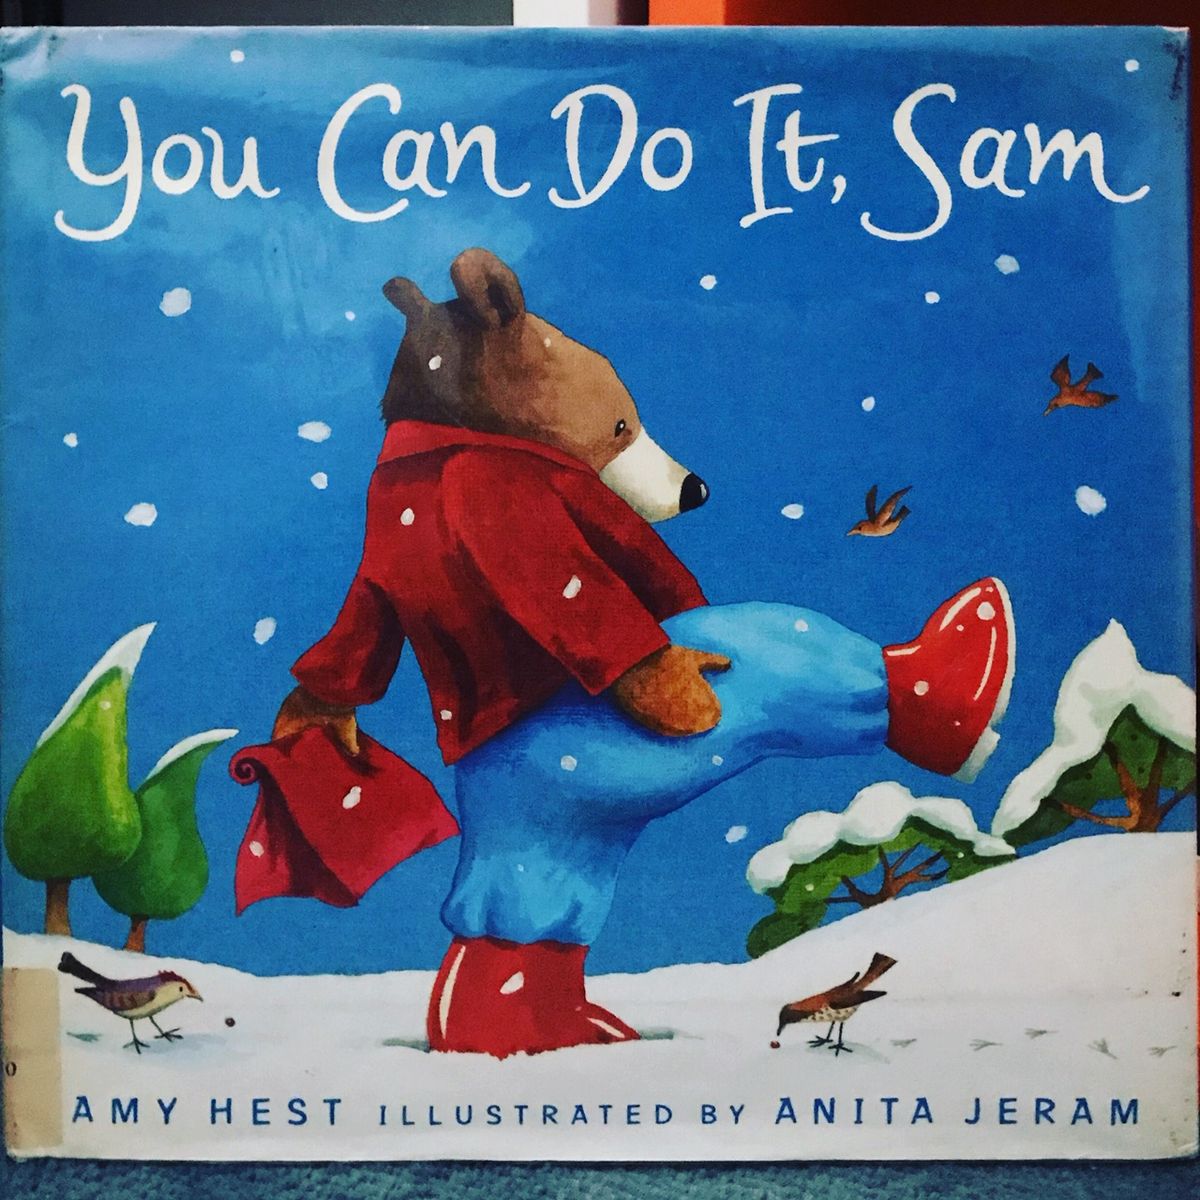 You Can Do It, Sam by Amy Hest & Anita Jeram